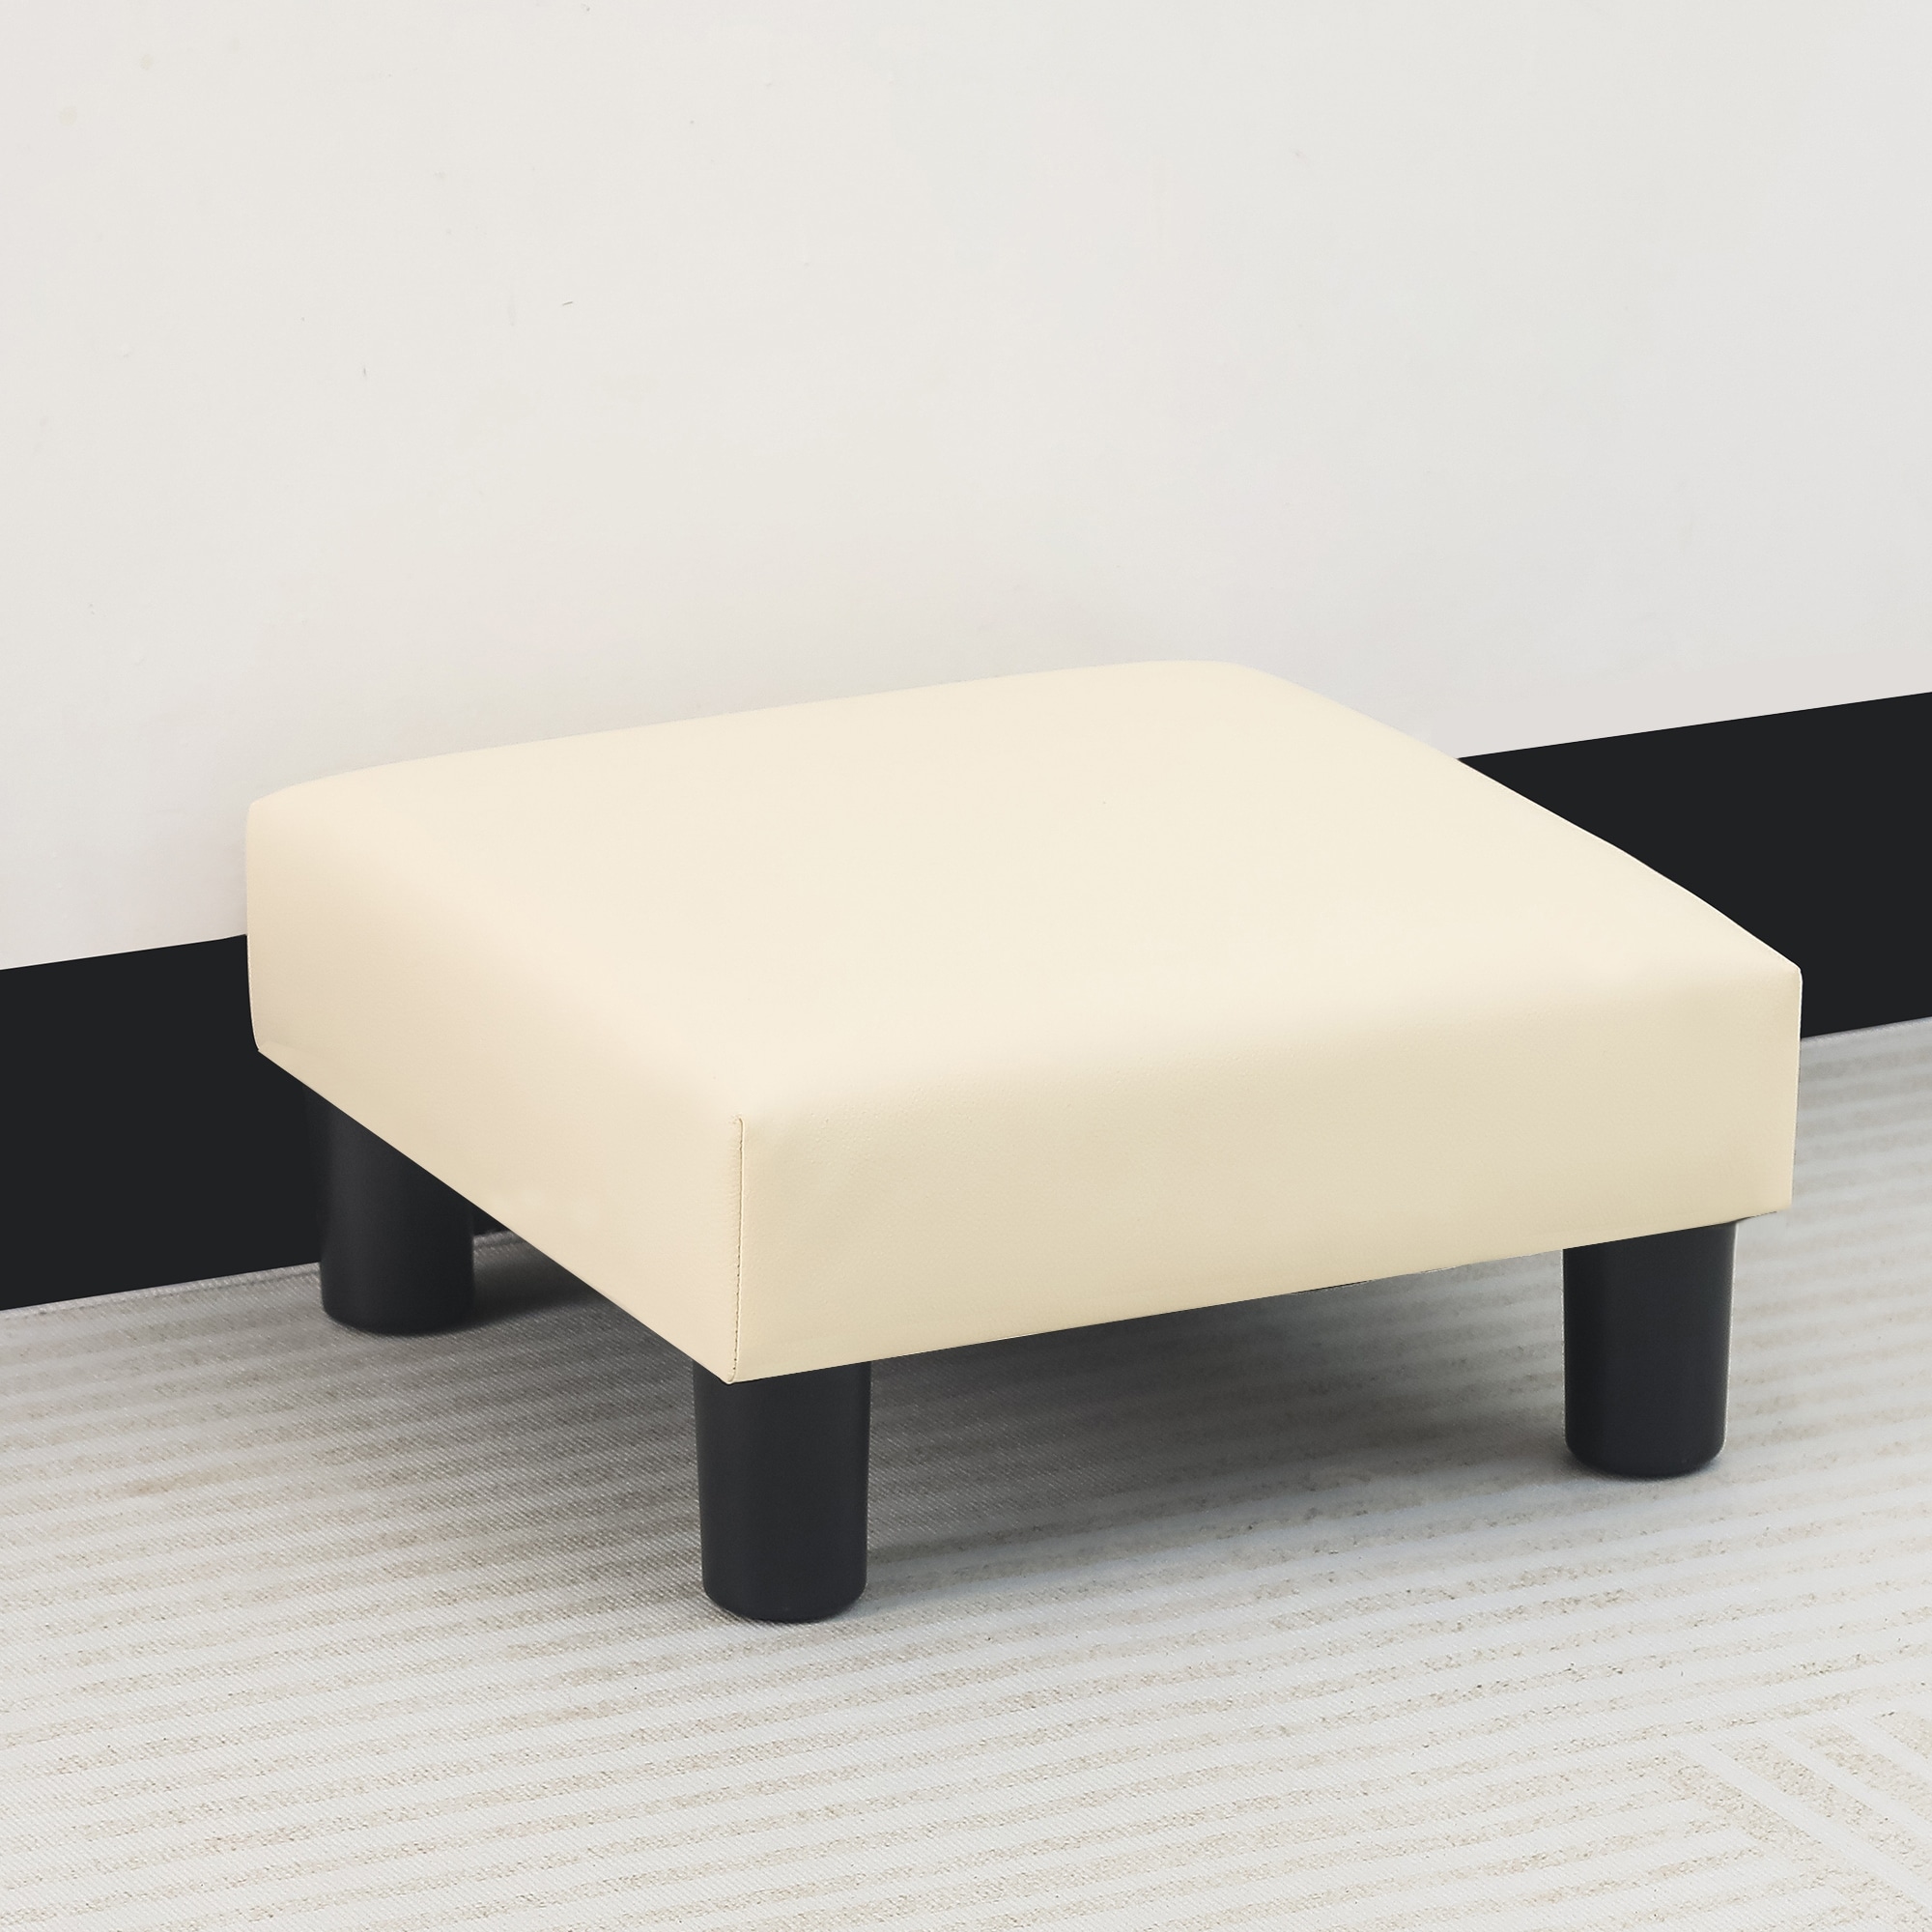 Adeco 15'' Small Ottoman Upholstered Foot Rest - Bed Bath & Beyond -  33514592